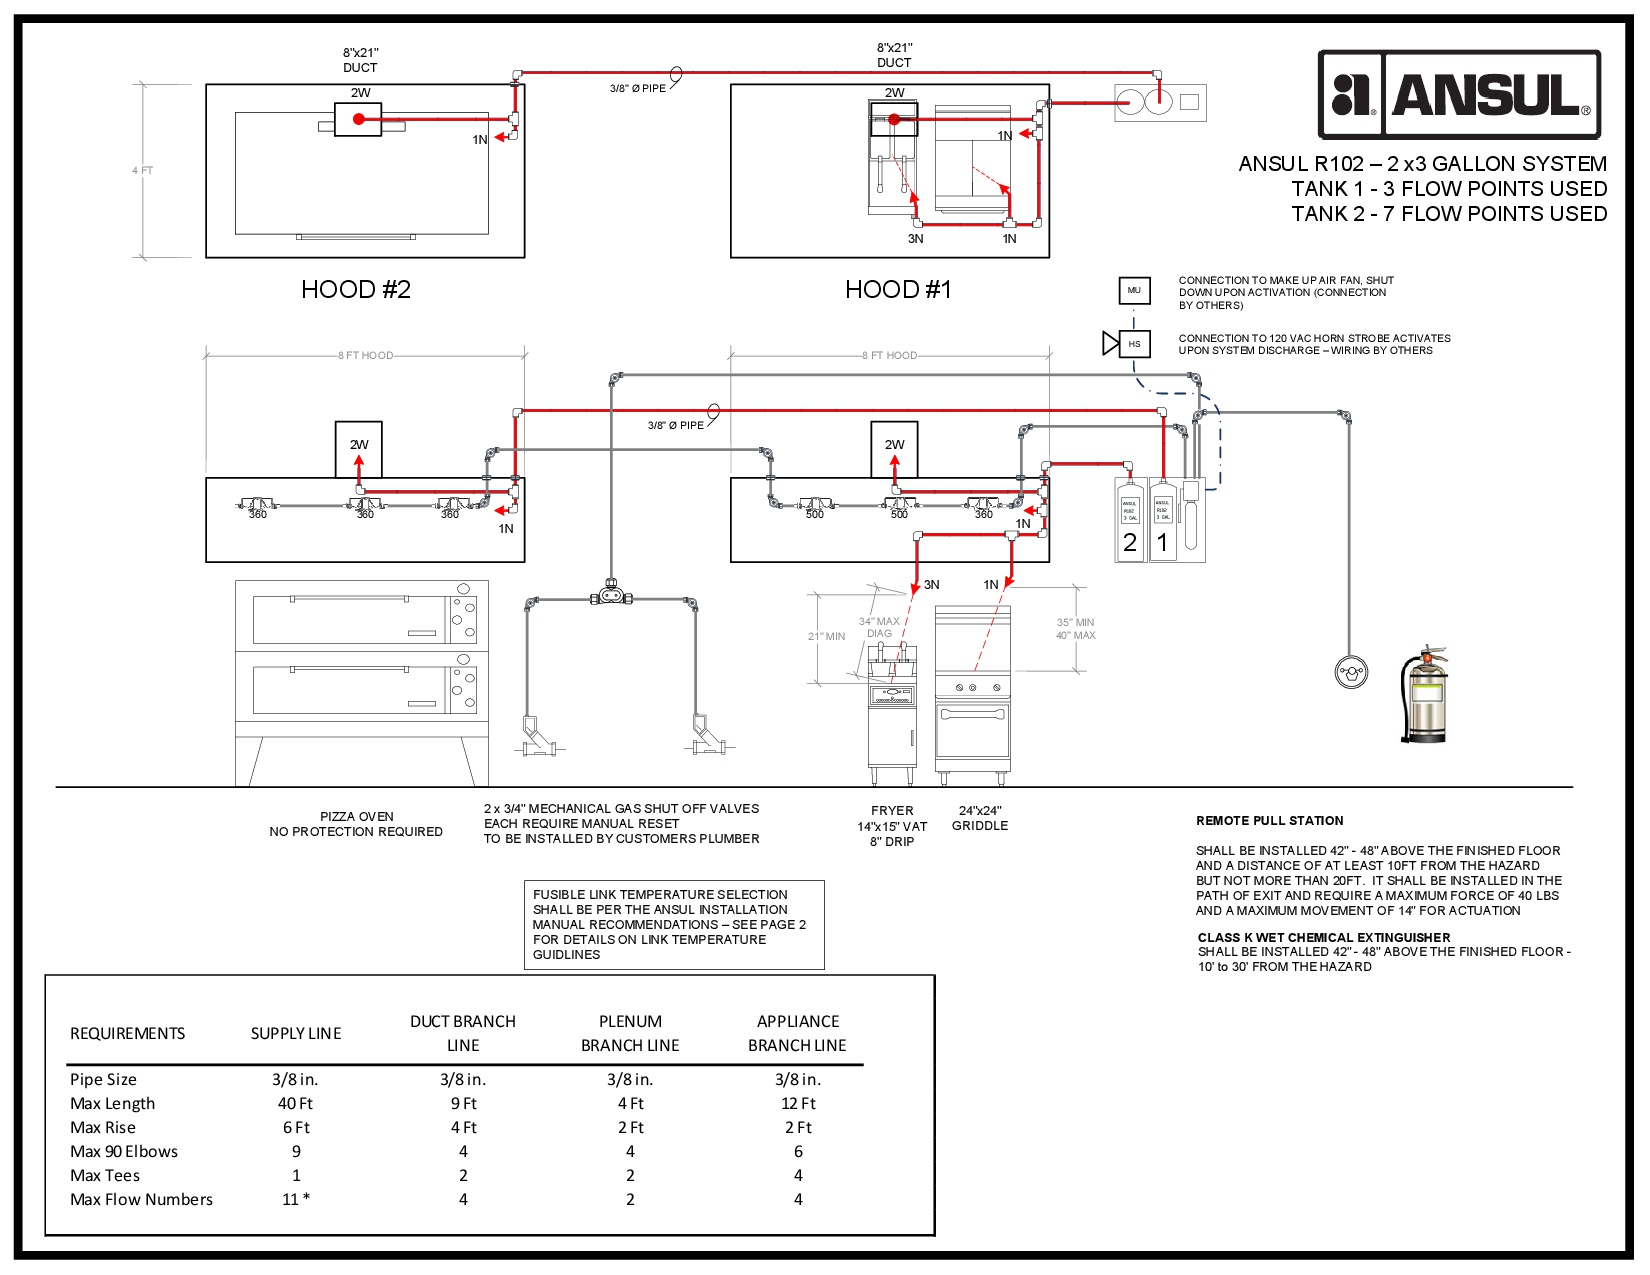 Ansul R102 Fire System Drawing